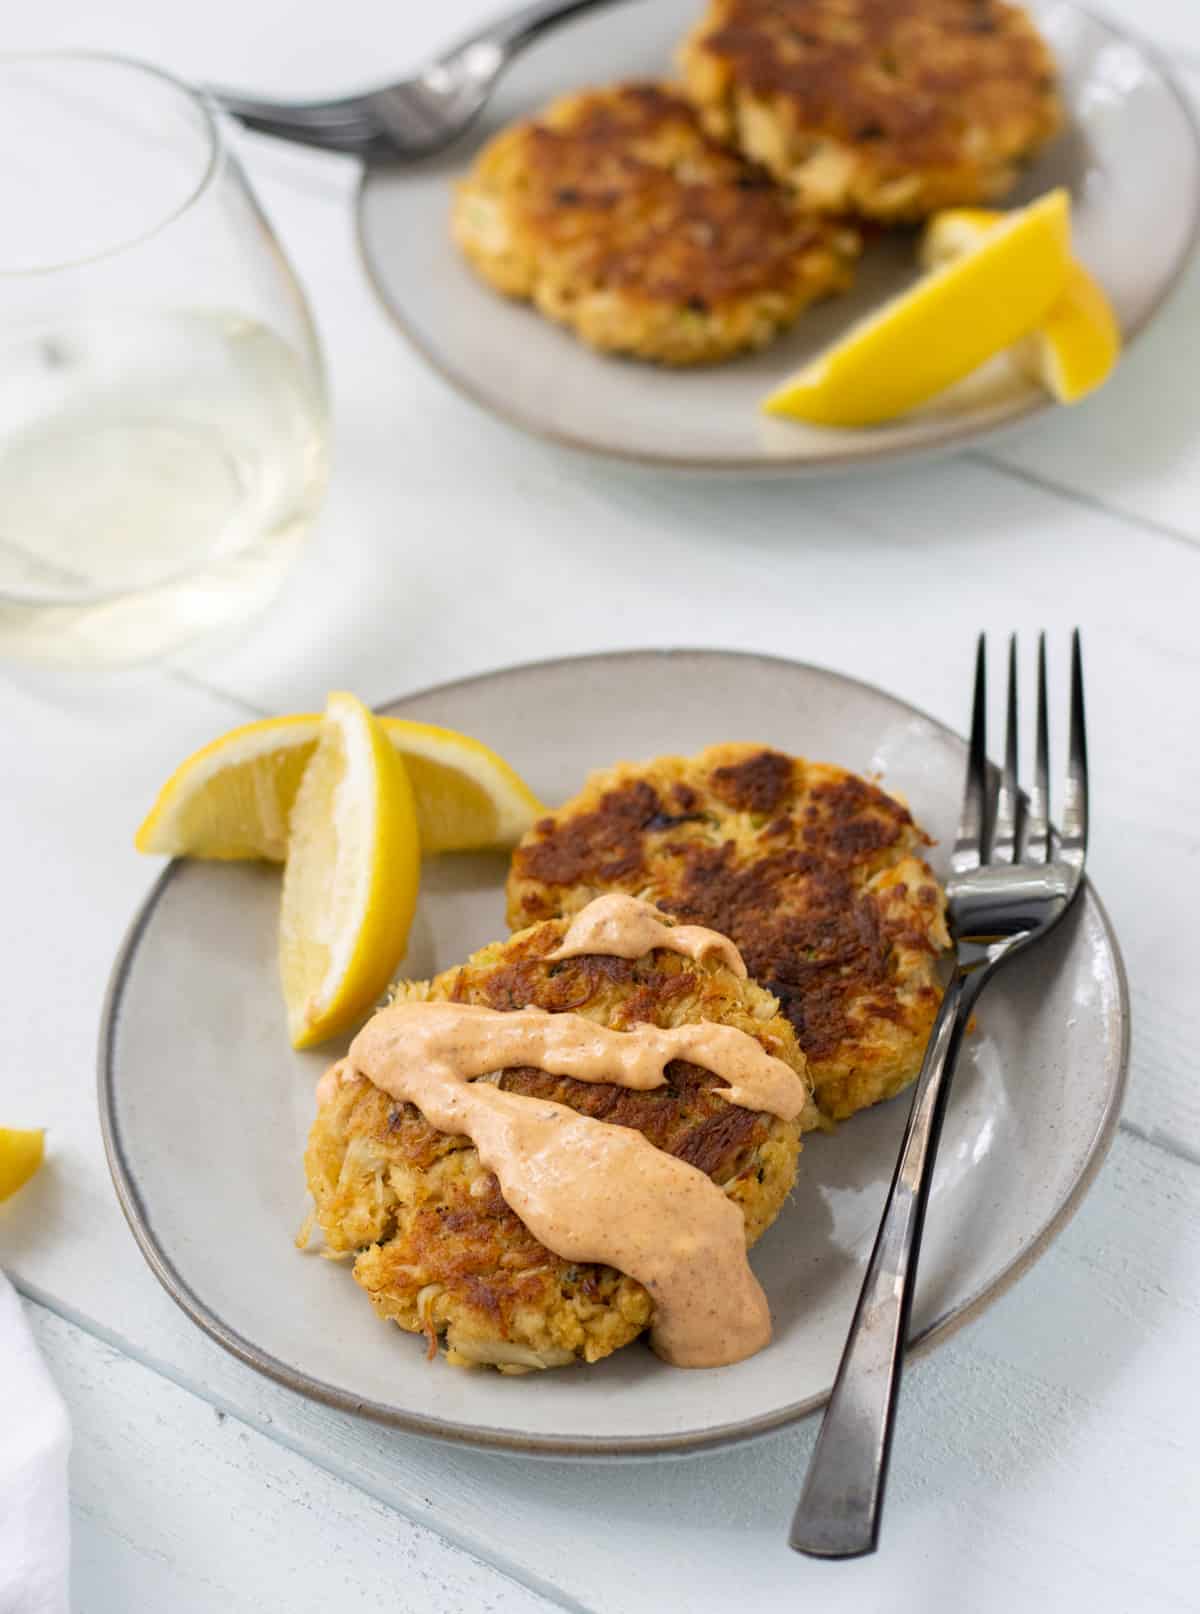 Two crab cakes on a plate with remoulade sauce drizzled on one with a fork and lemon wedges.